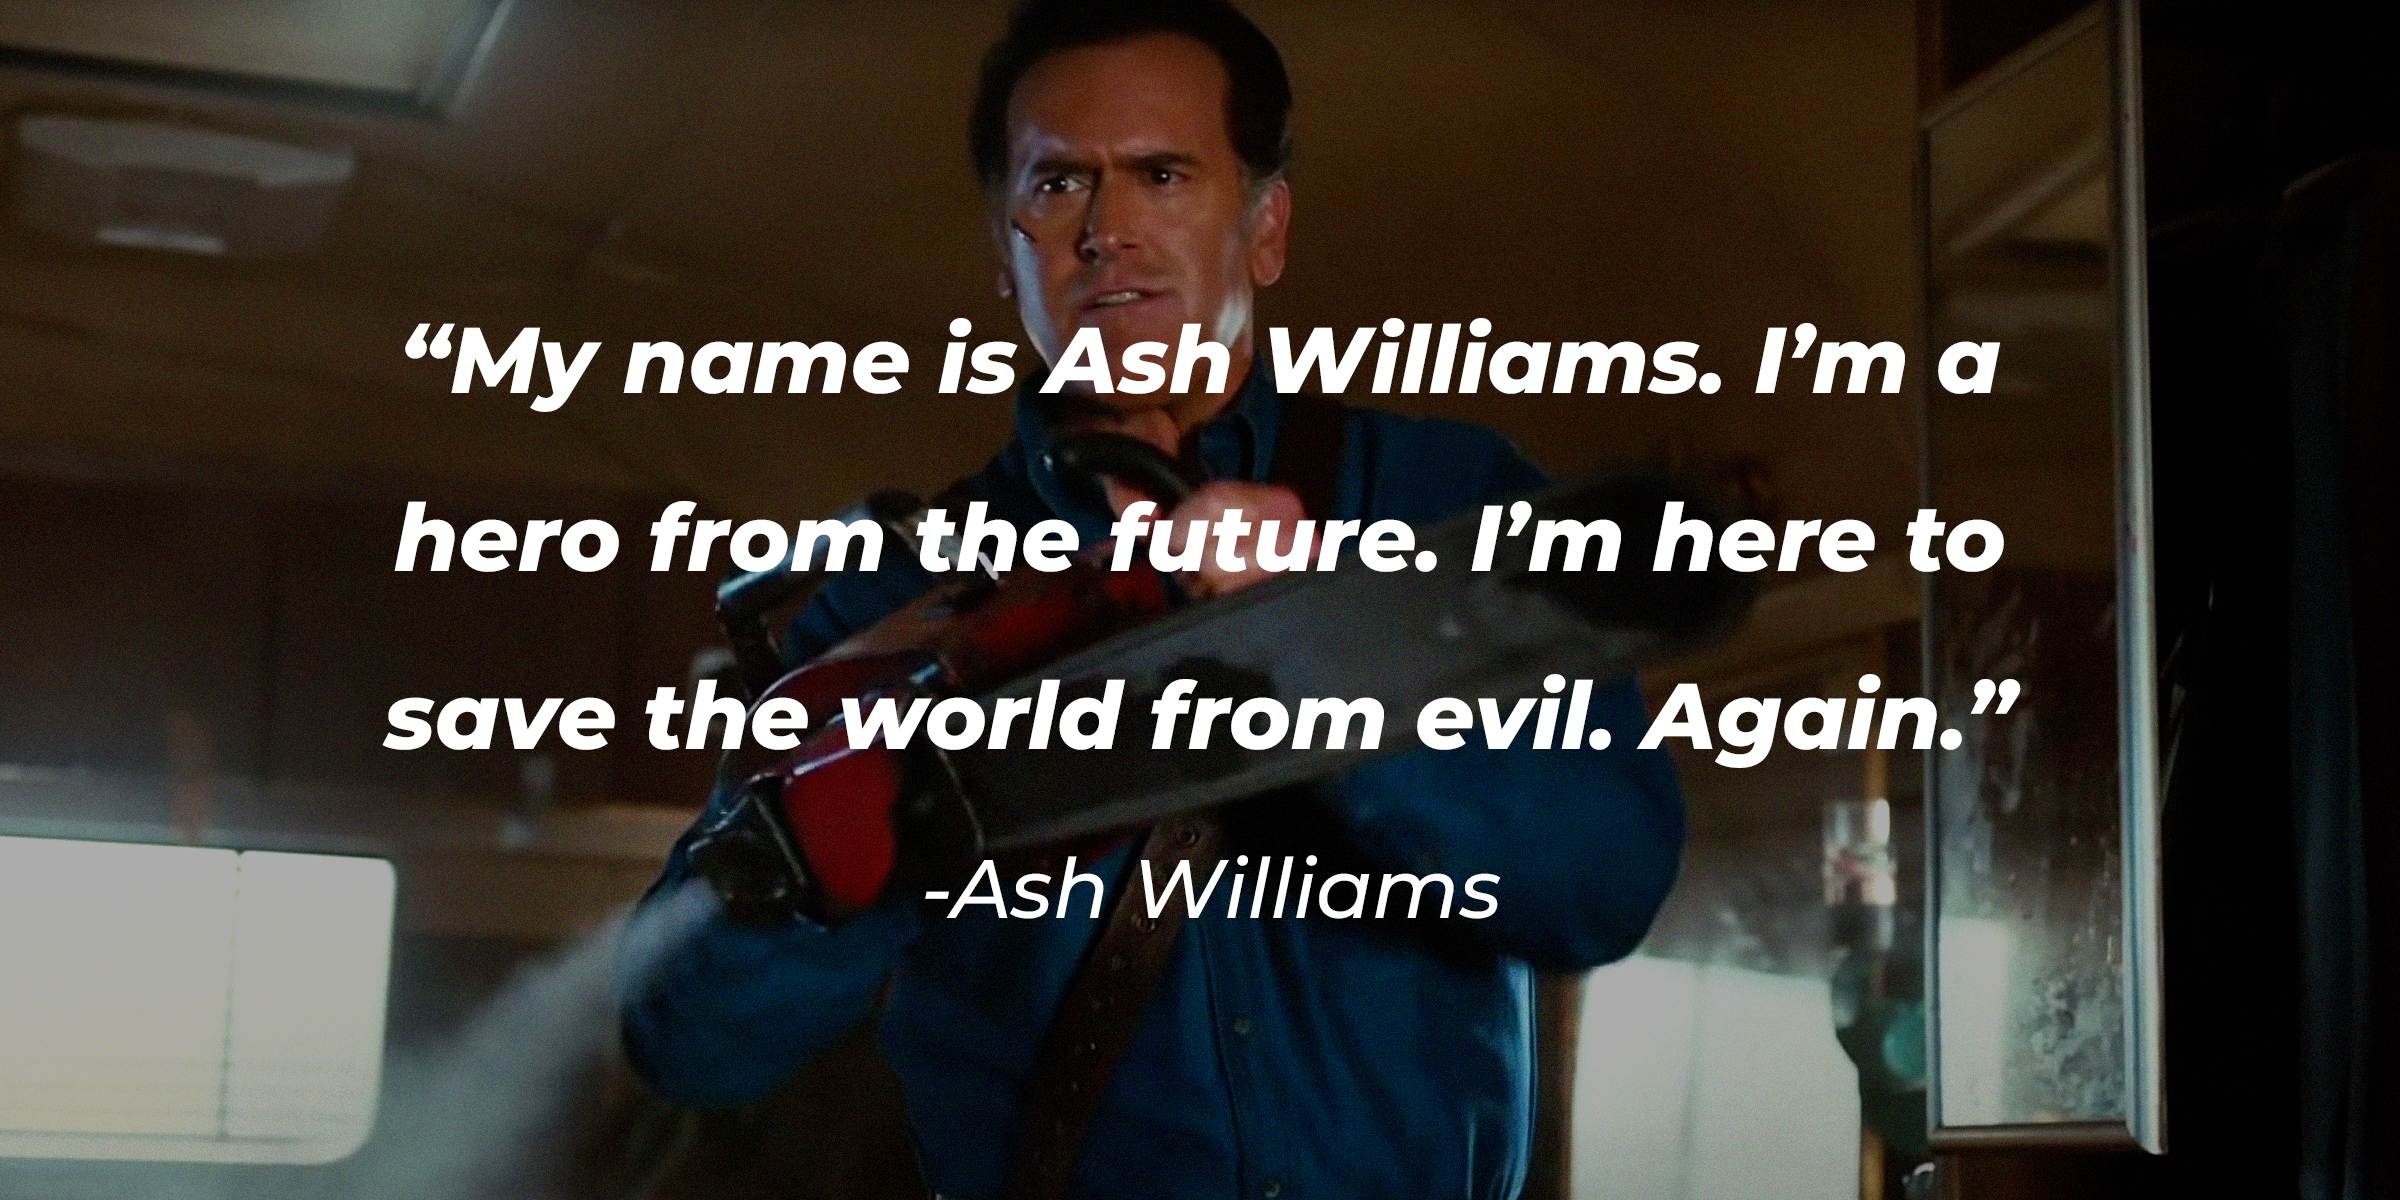 A photo of Ash Williams with Ash Williams' quote: “My name is Ash Williams. I’m a hero from the future. I’m here to save the world from evil. Again.” | Source: facebook.com/ashvsevildead